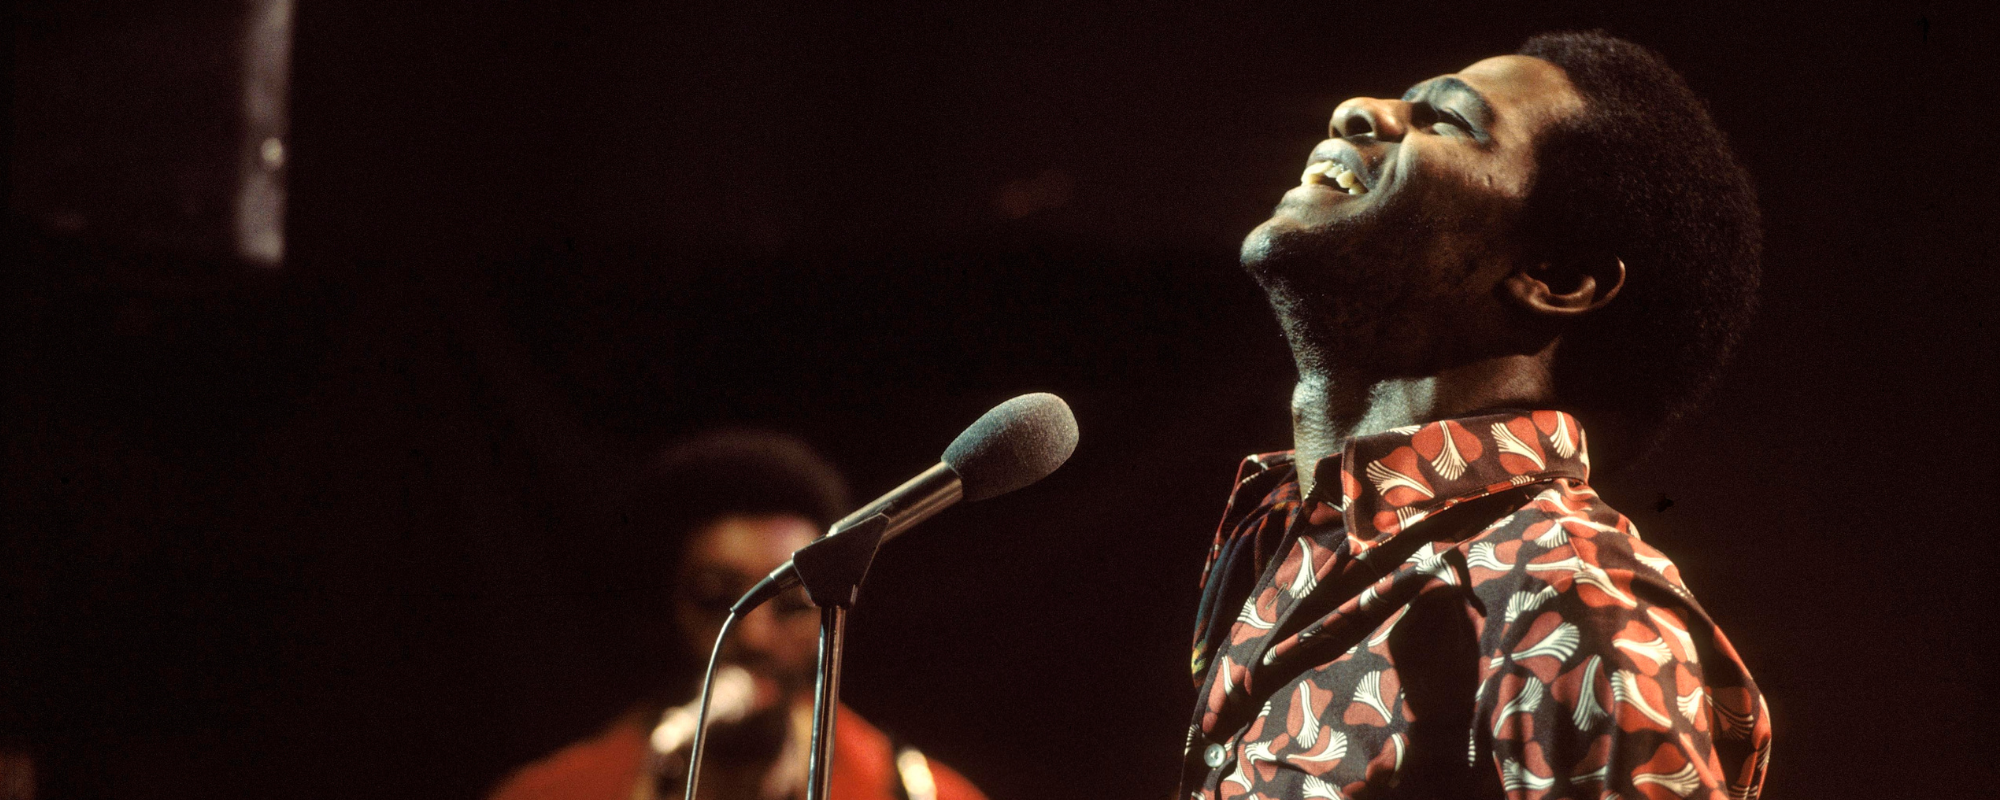 The Meaning Behind Al Green’s Tragic “Tired of Being Alone”